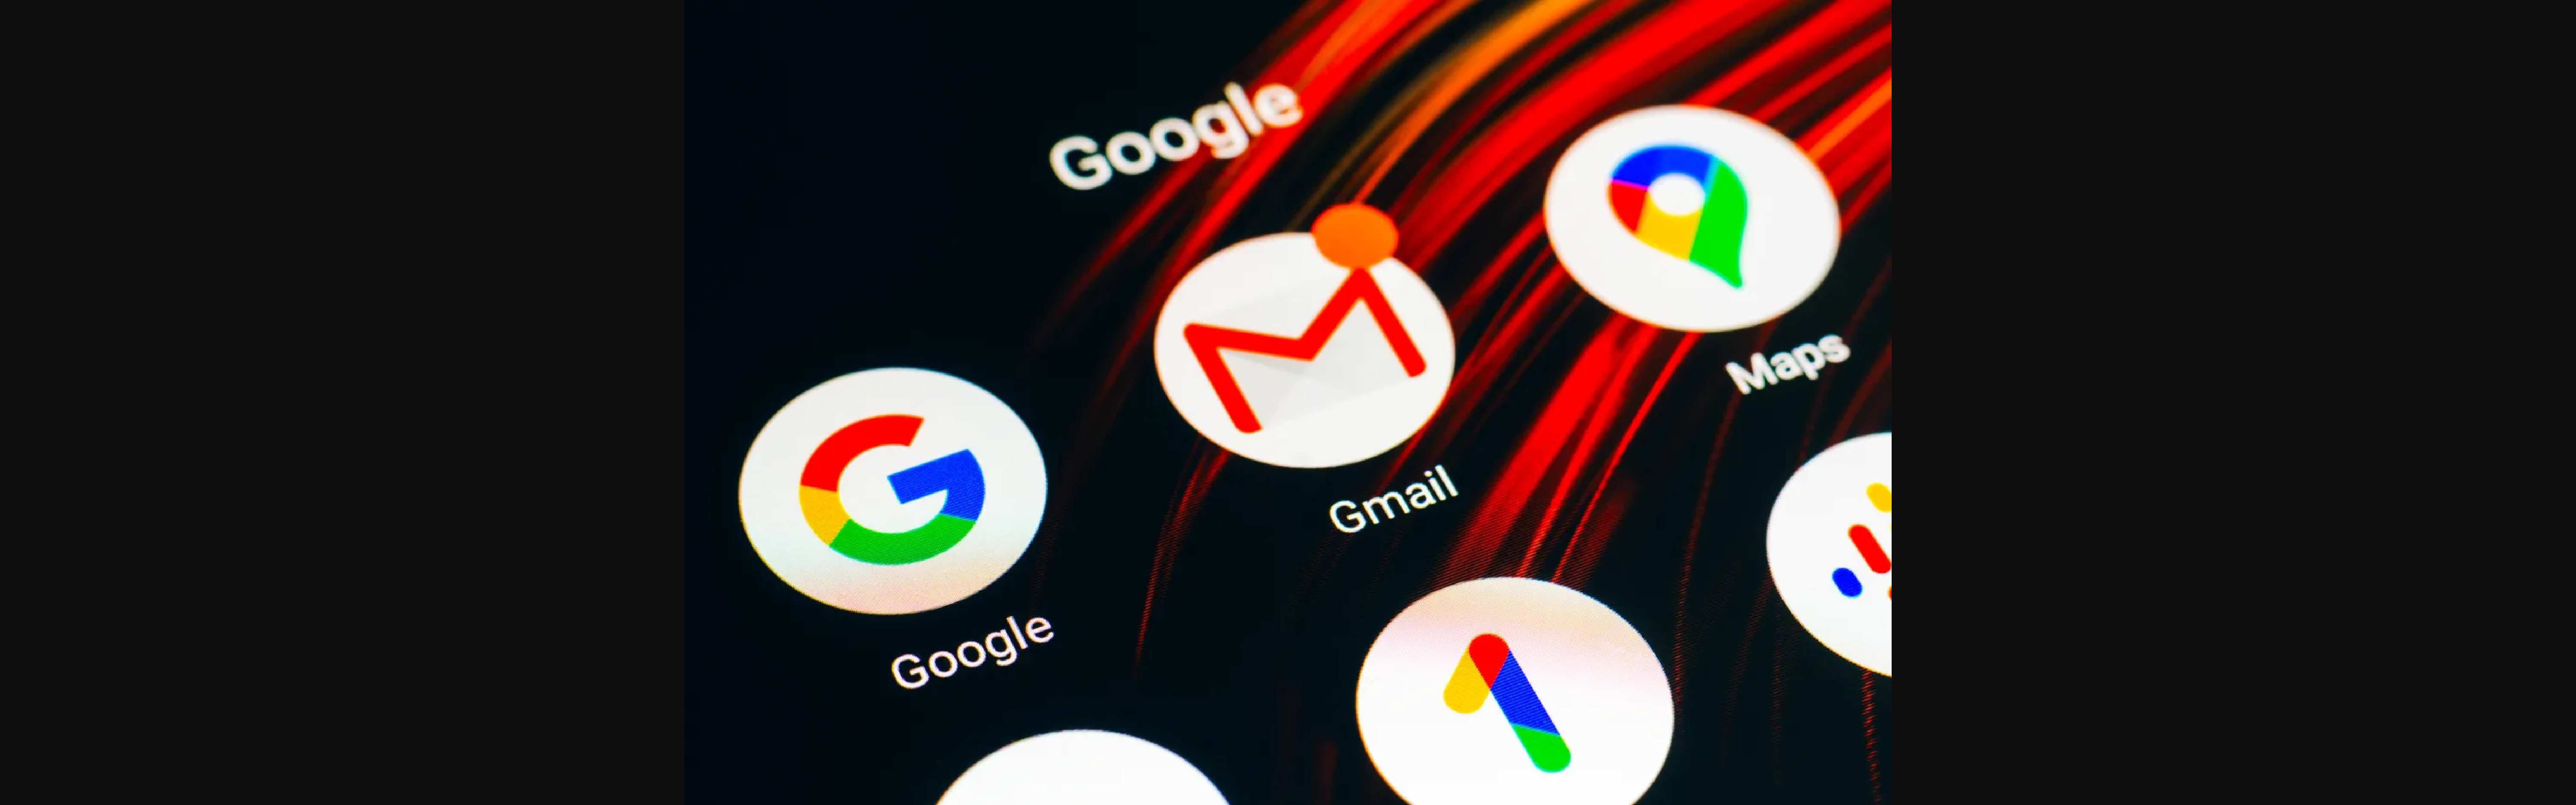 How To Change Gmail Account On Android Tablet